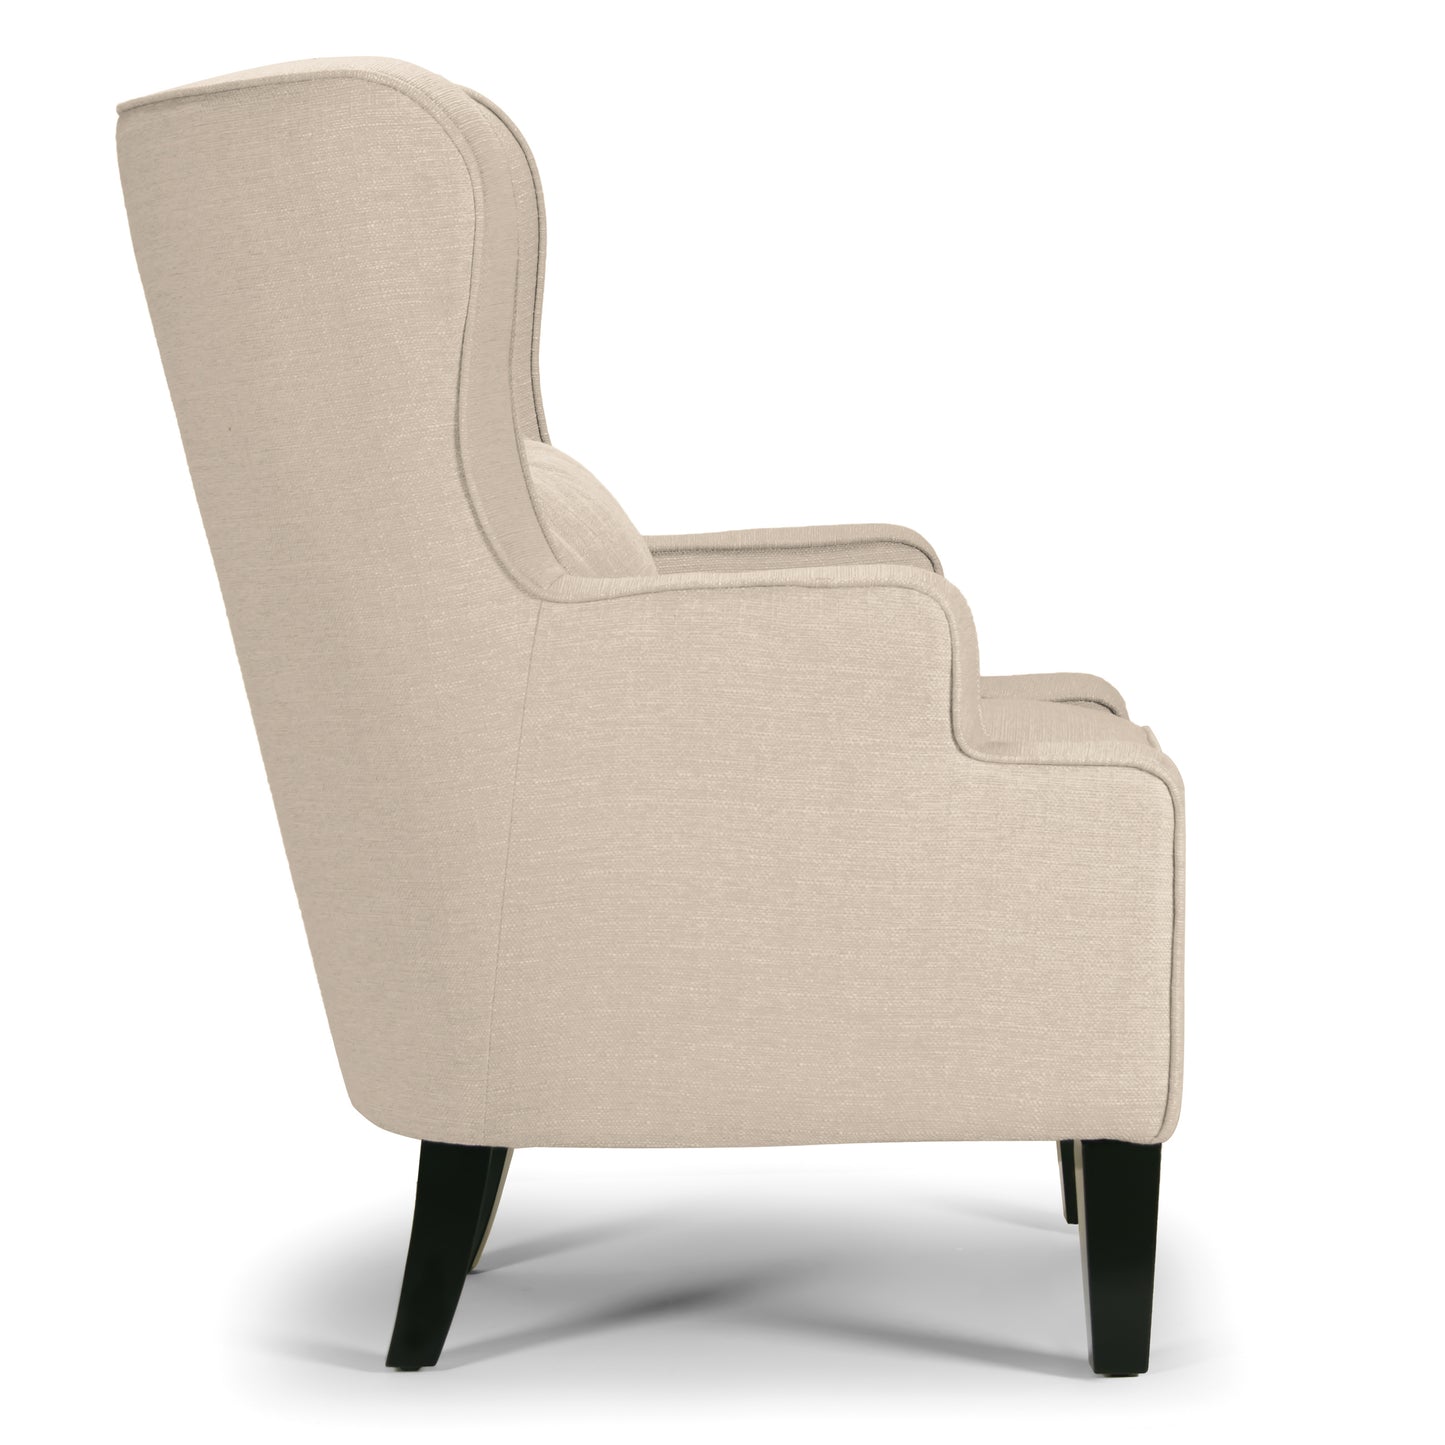 Aletta Beige Fabric High-back Wing Chair with Removable Seat Cushion and Pillow